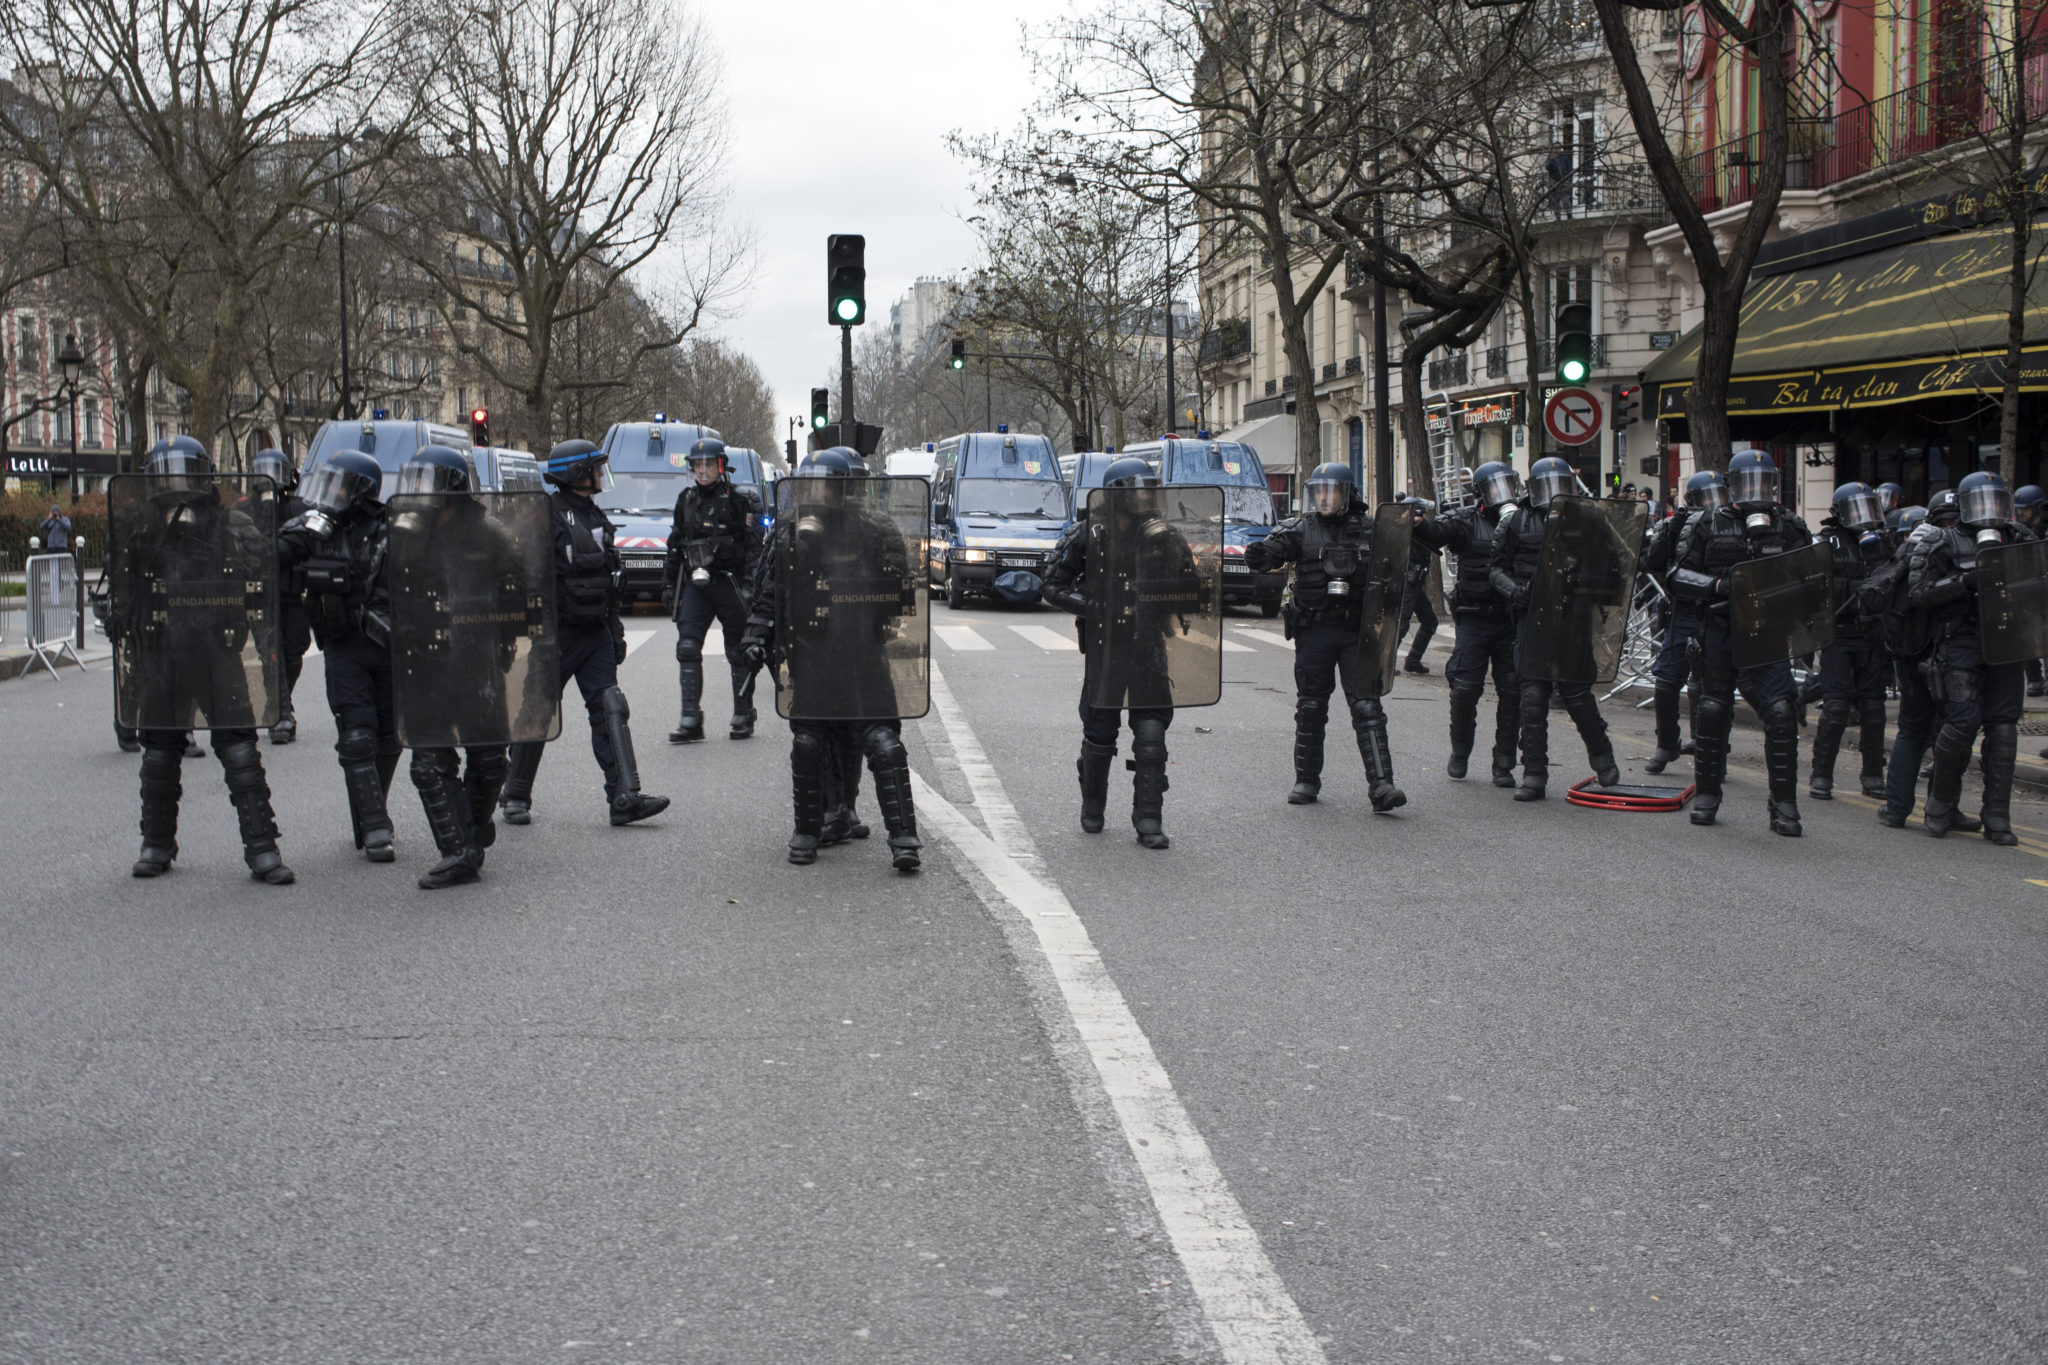 France: Unchecked clampdown on protests under guise of fighting terrorism